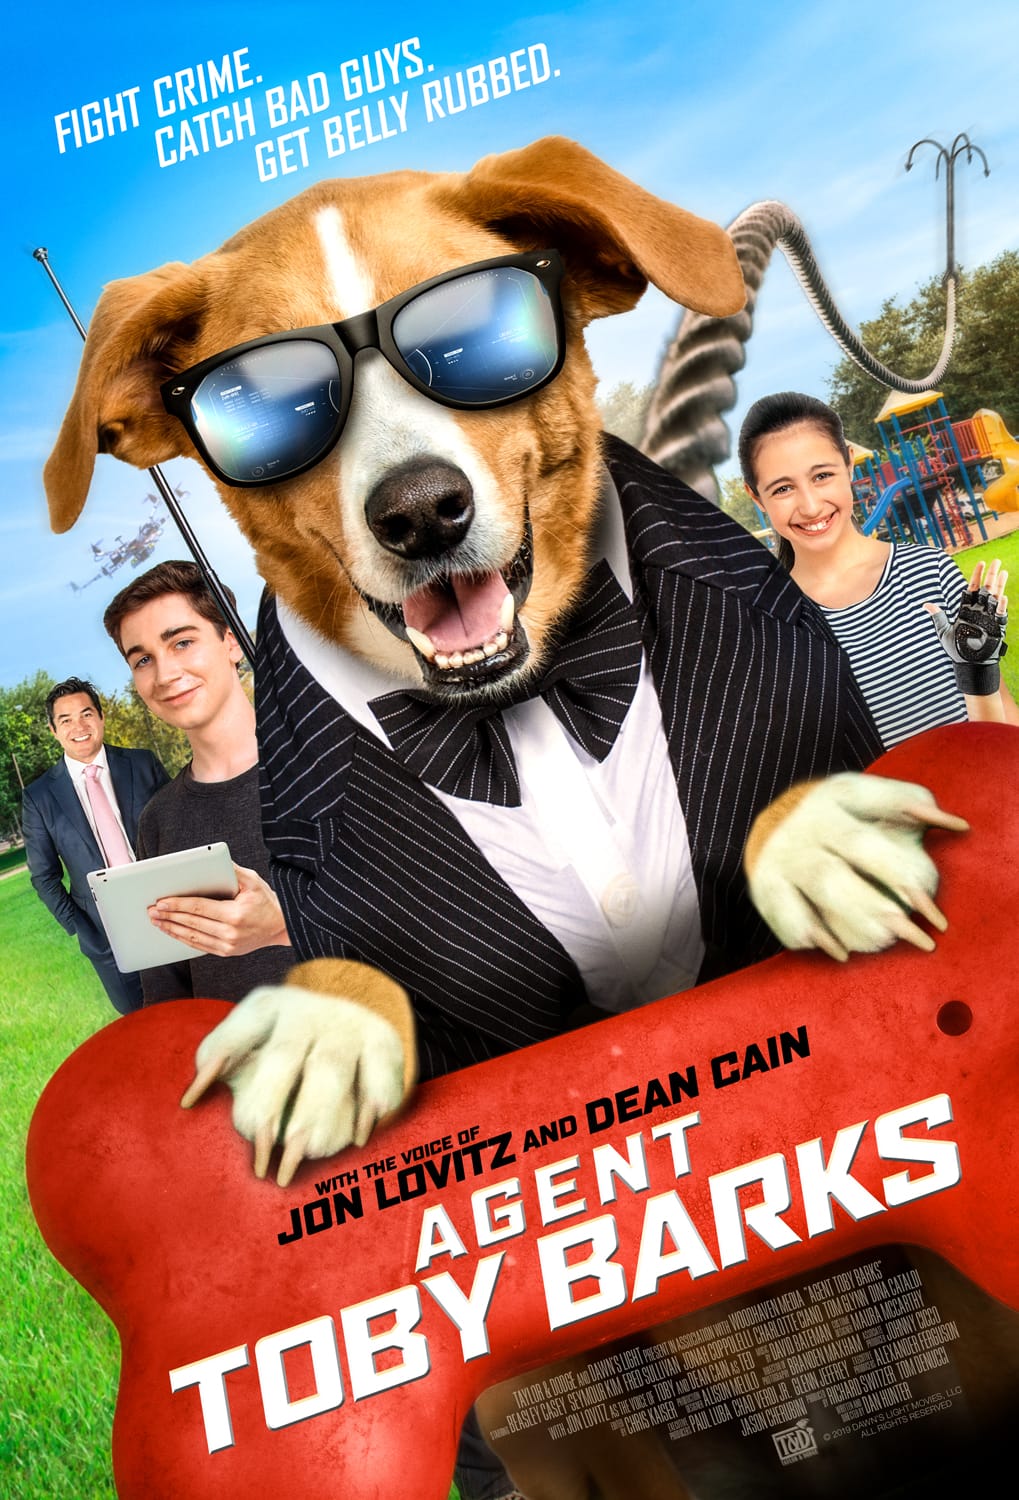 Toby appears to be an ordinary dog living the simple put life, but unbeknownst to his family, he moonlights as secret government operative, Agent Toby Barks.พากย์ไทย Soundtrack : Sub Thai (ดูแล้ว)